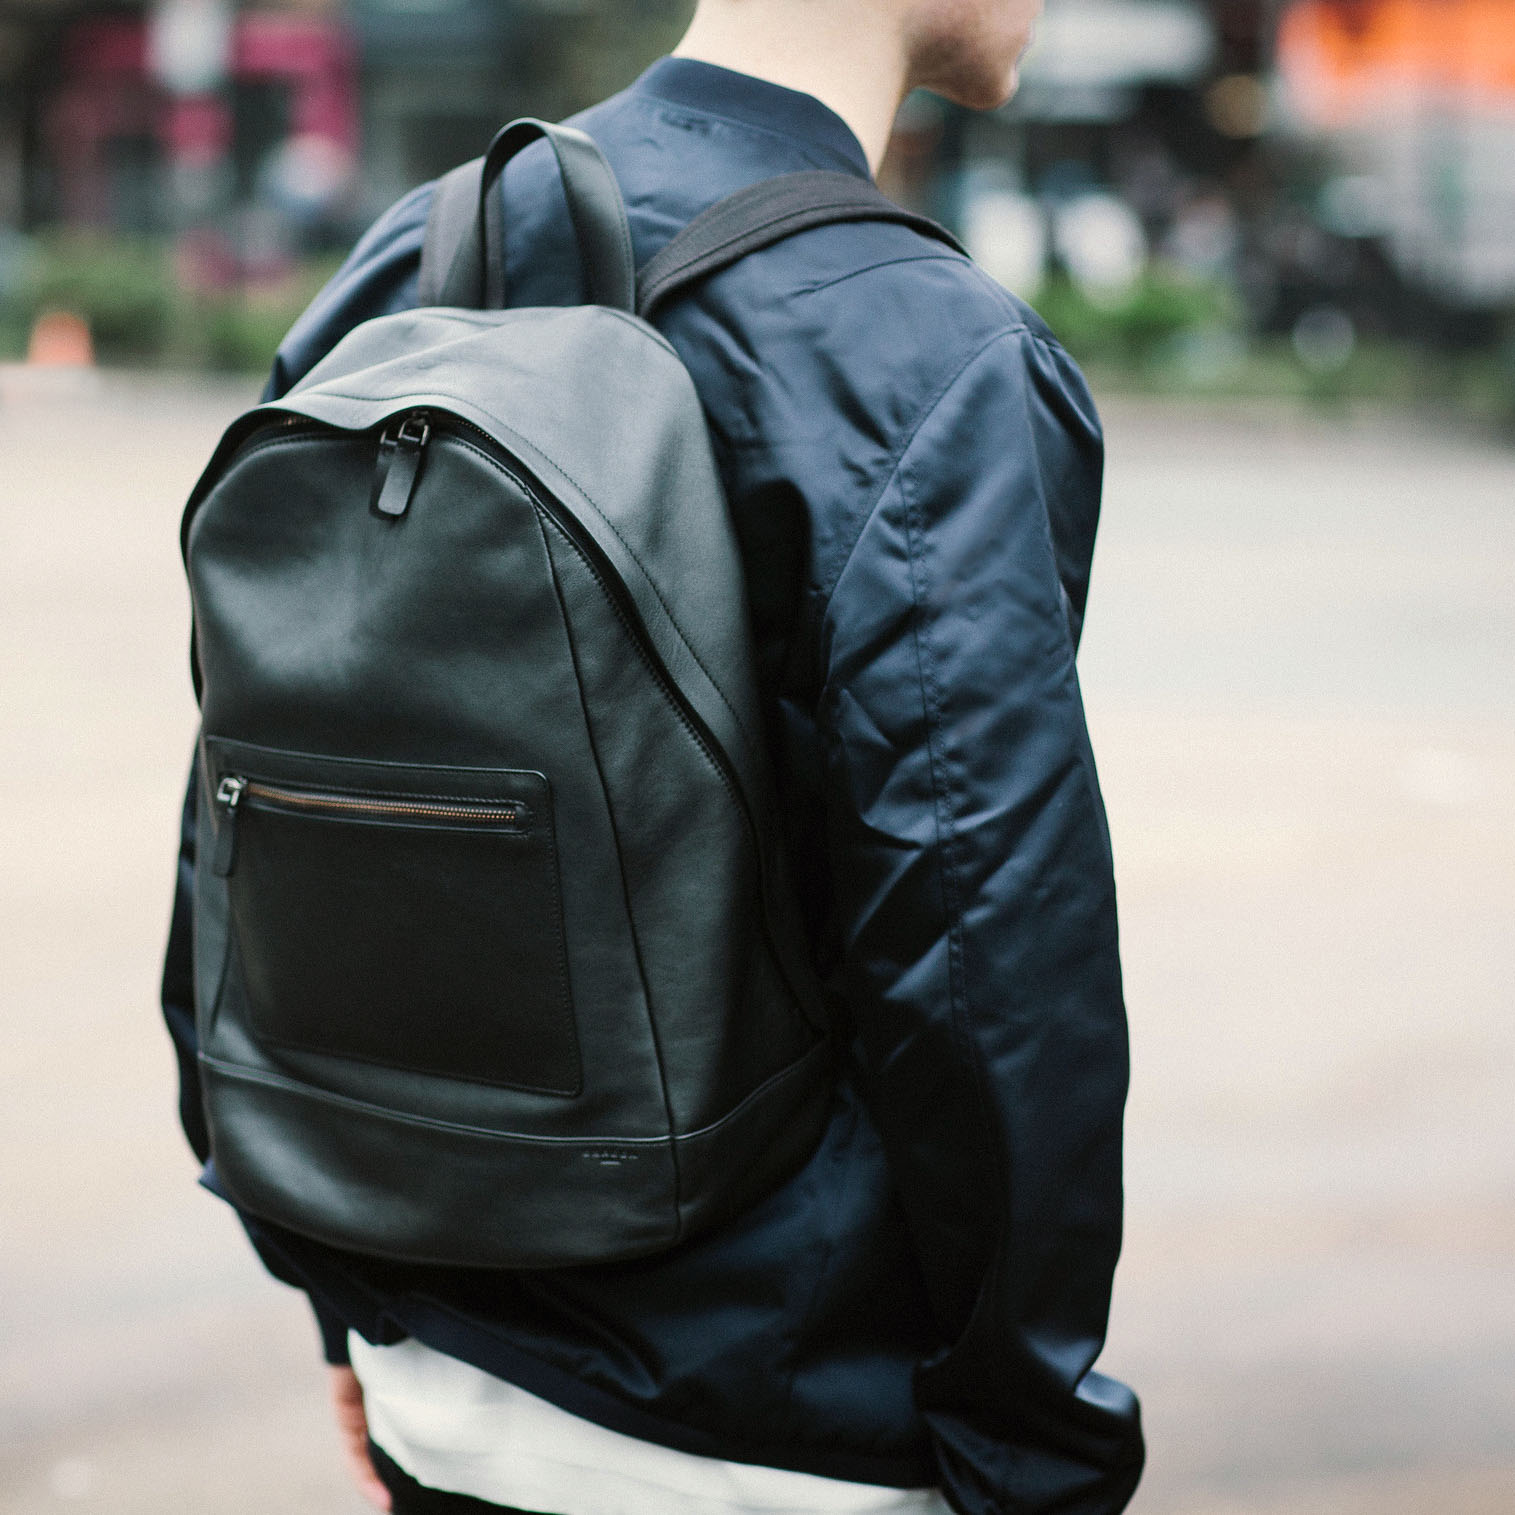 leather-back-pack-trend